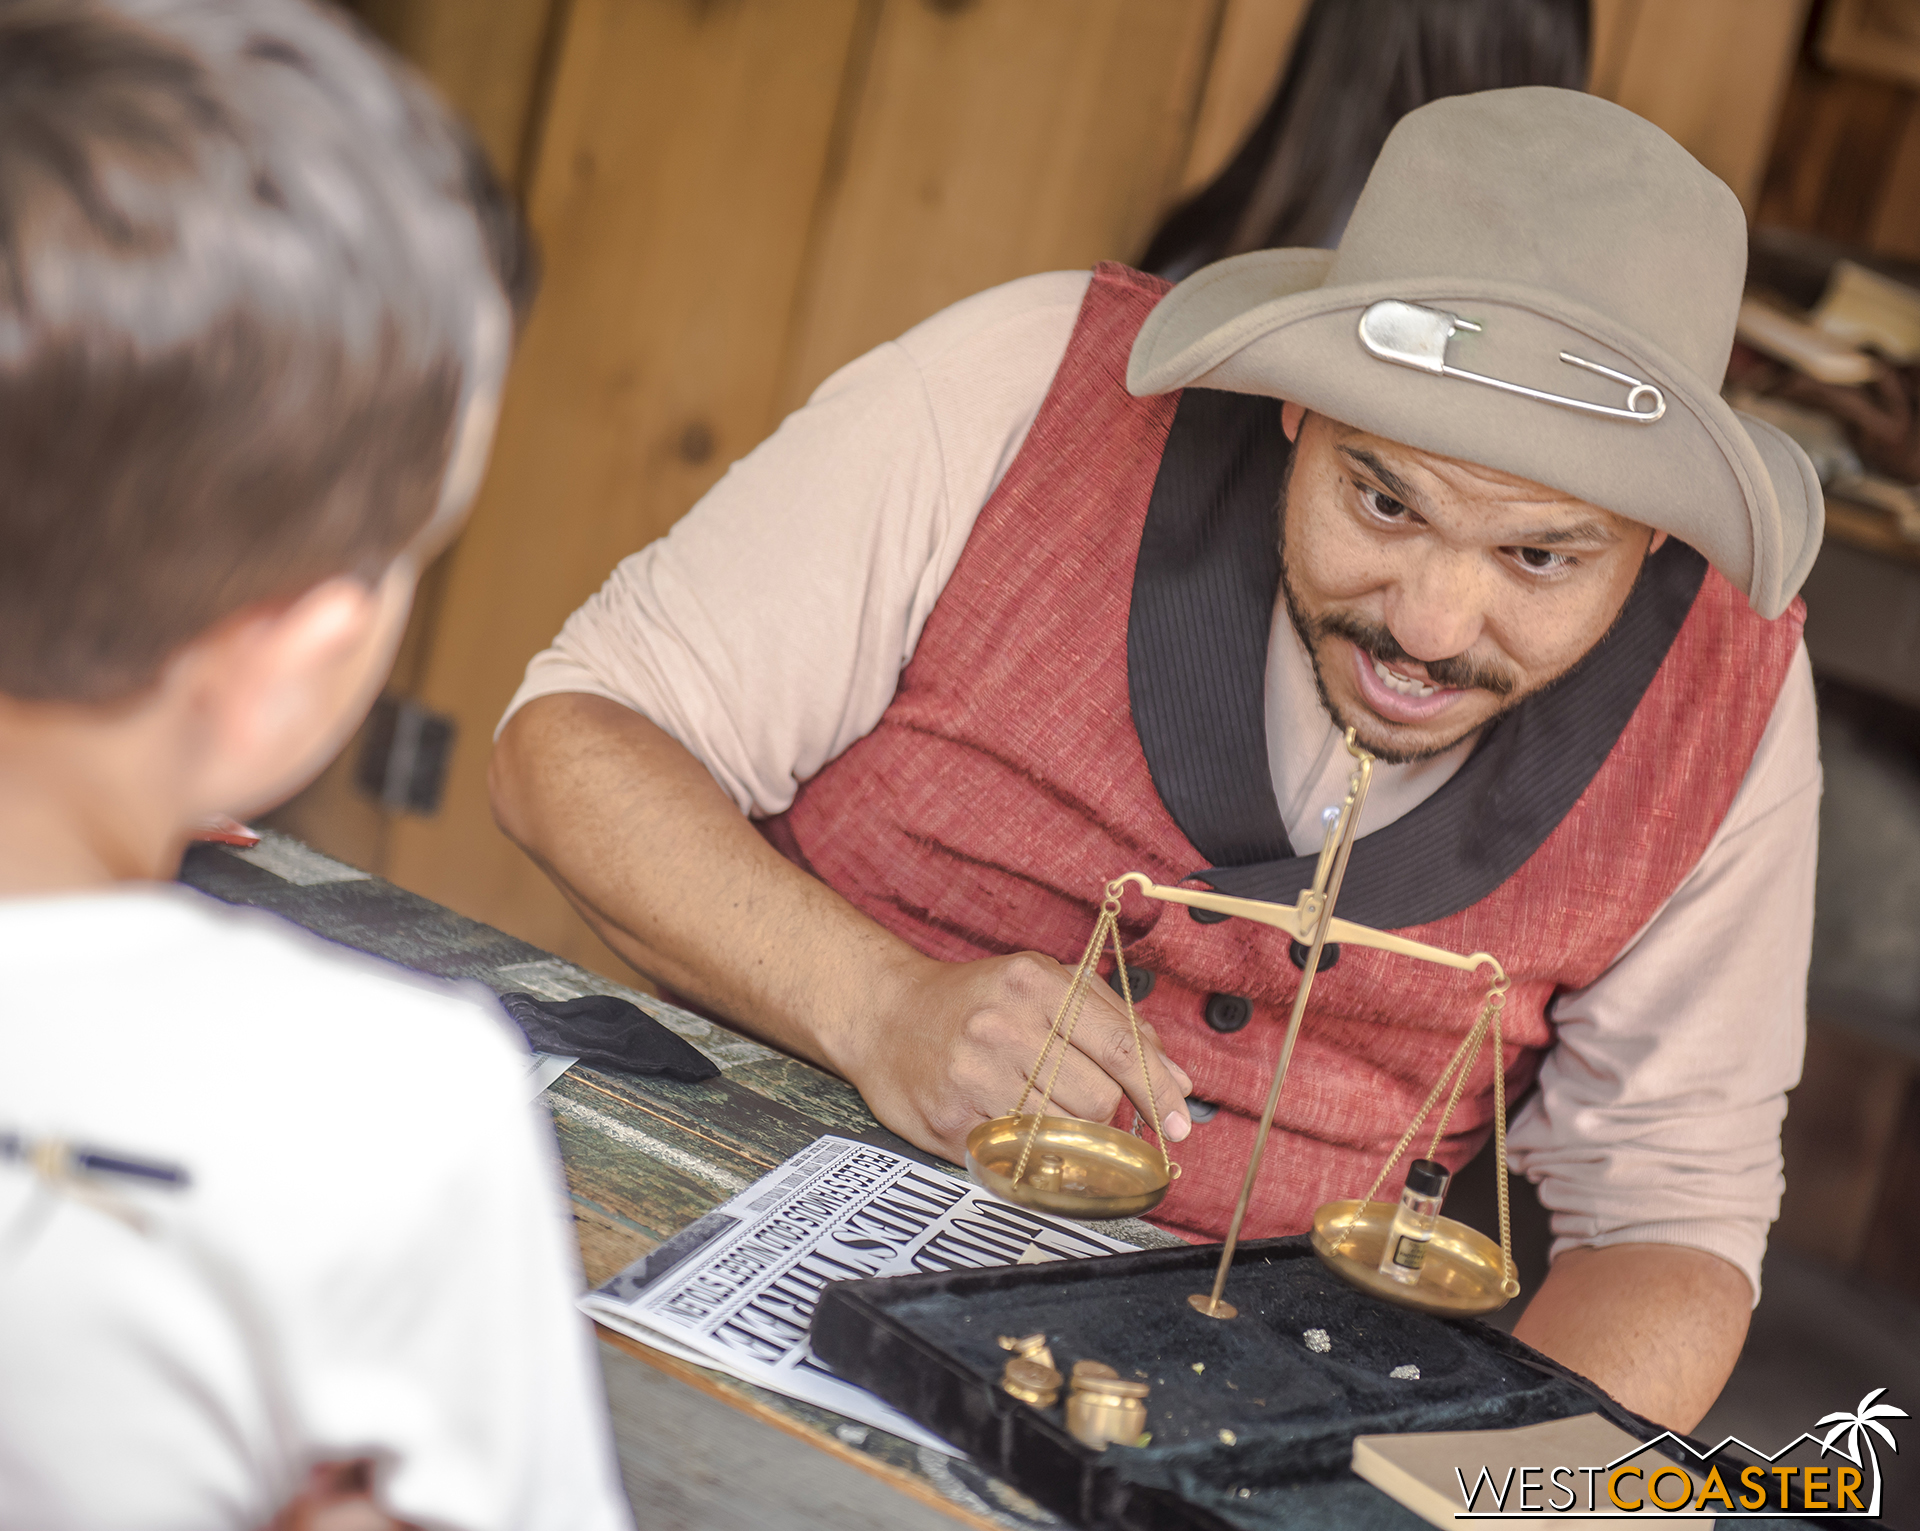  “Peg Leg” Cinch ascertains the value of gold that a young guest has brought to be assayed. 